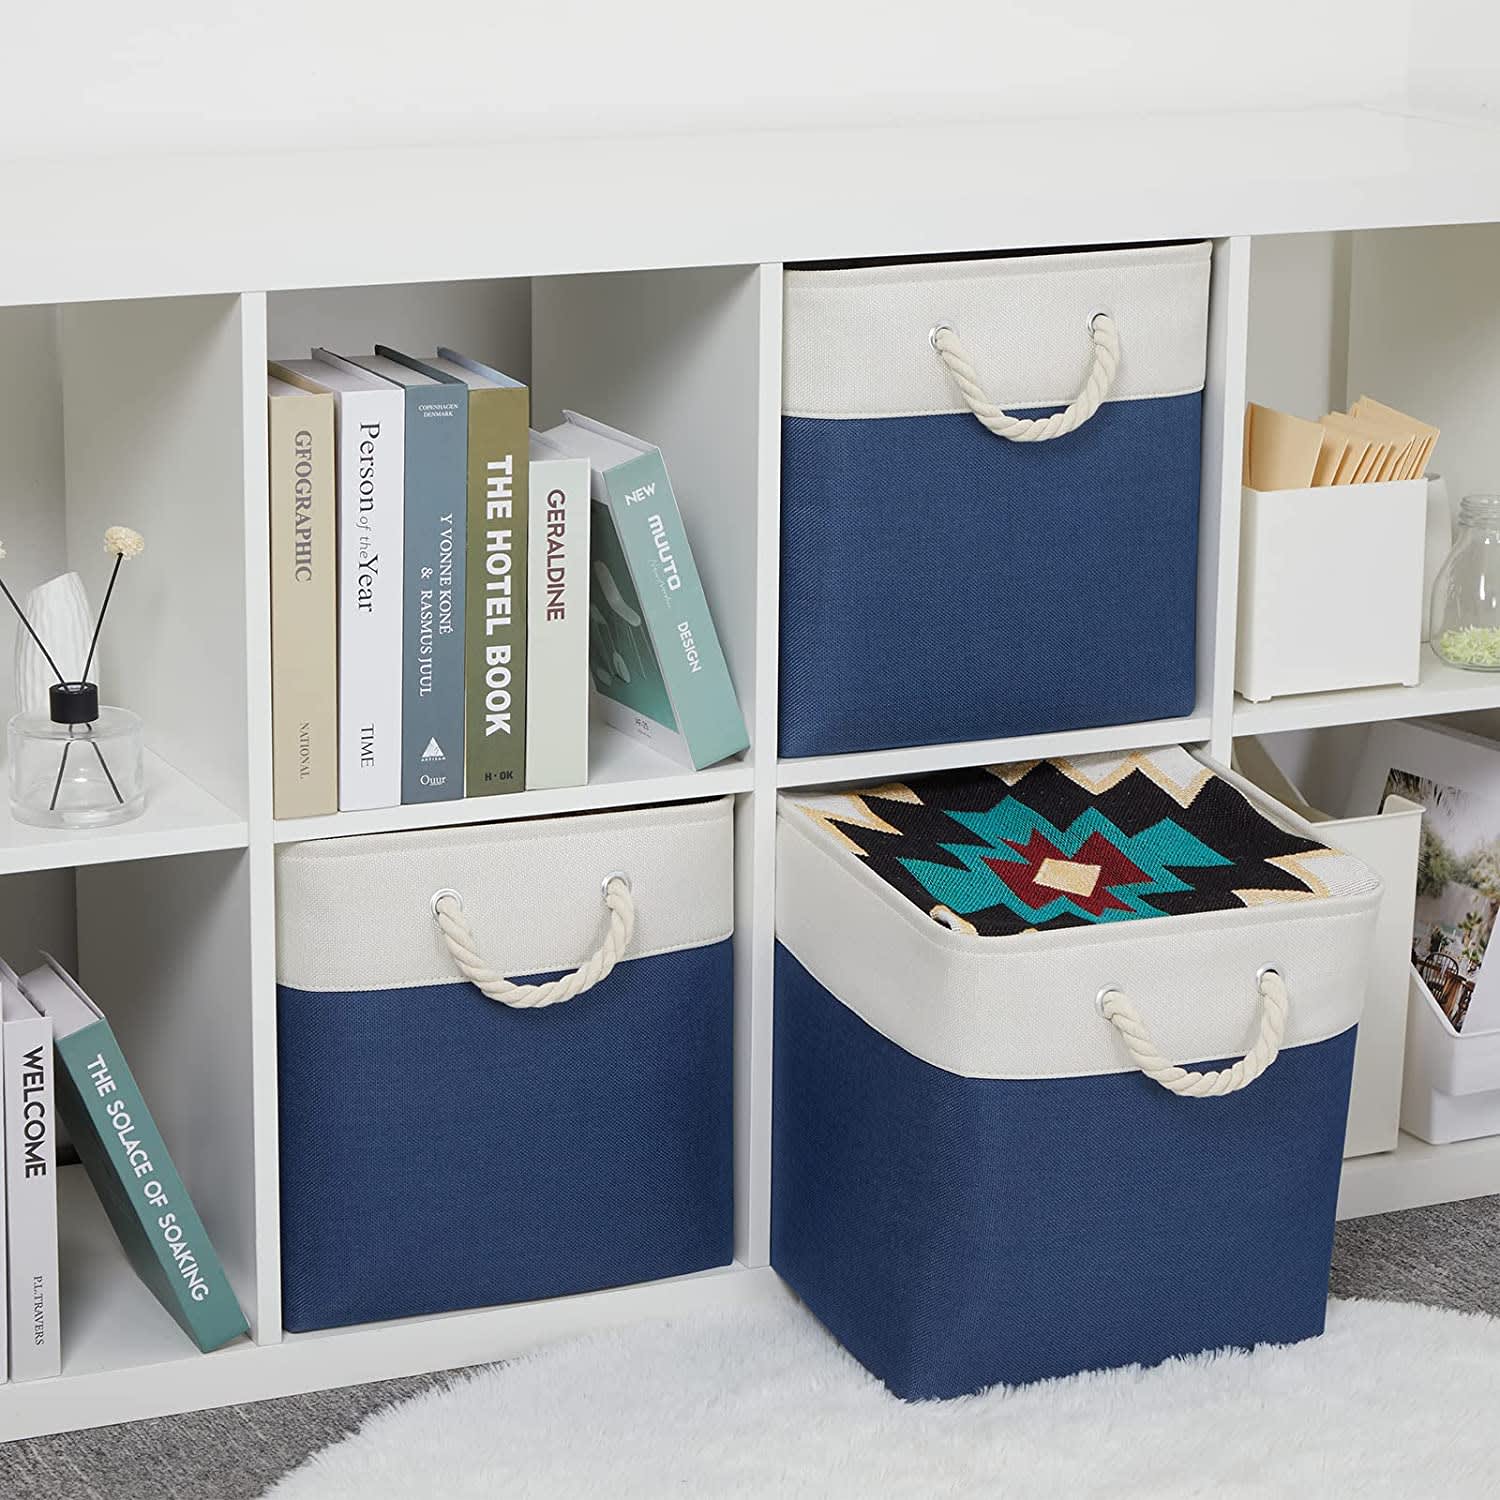  meori Small Collapsible Storage Bin, Fabric Storage Cube, with  Dual Handles for Shelves, Small Storage Containers for Organizing